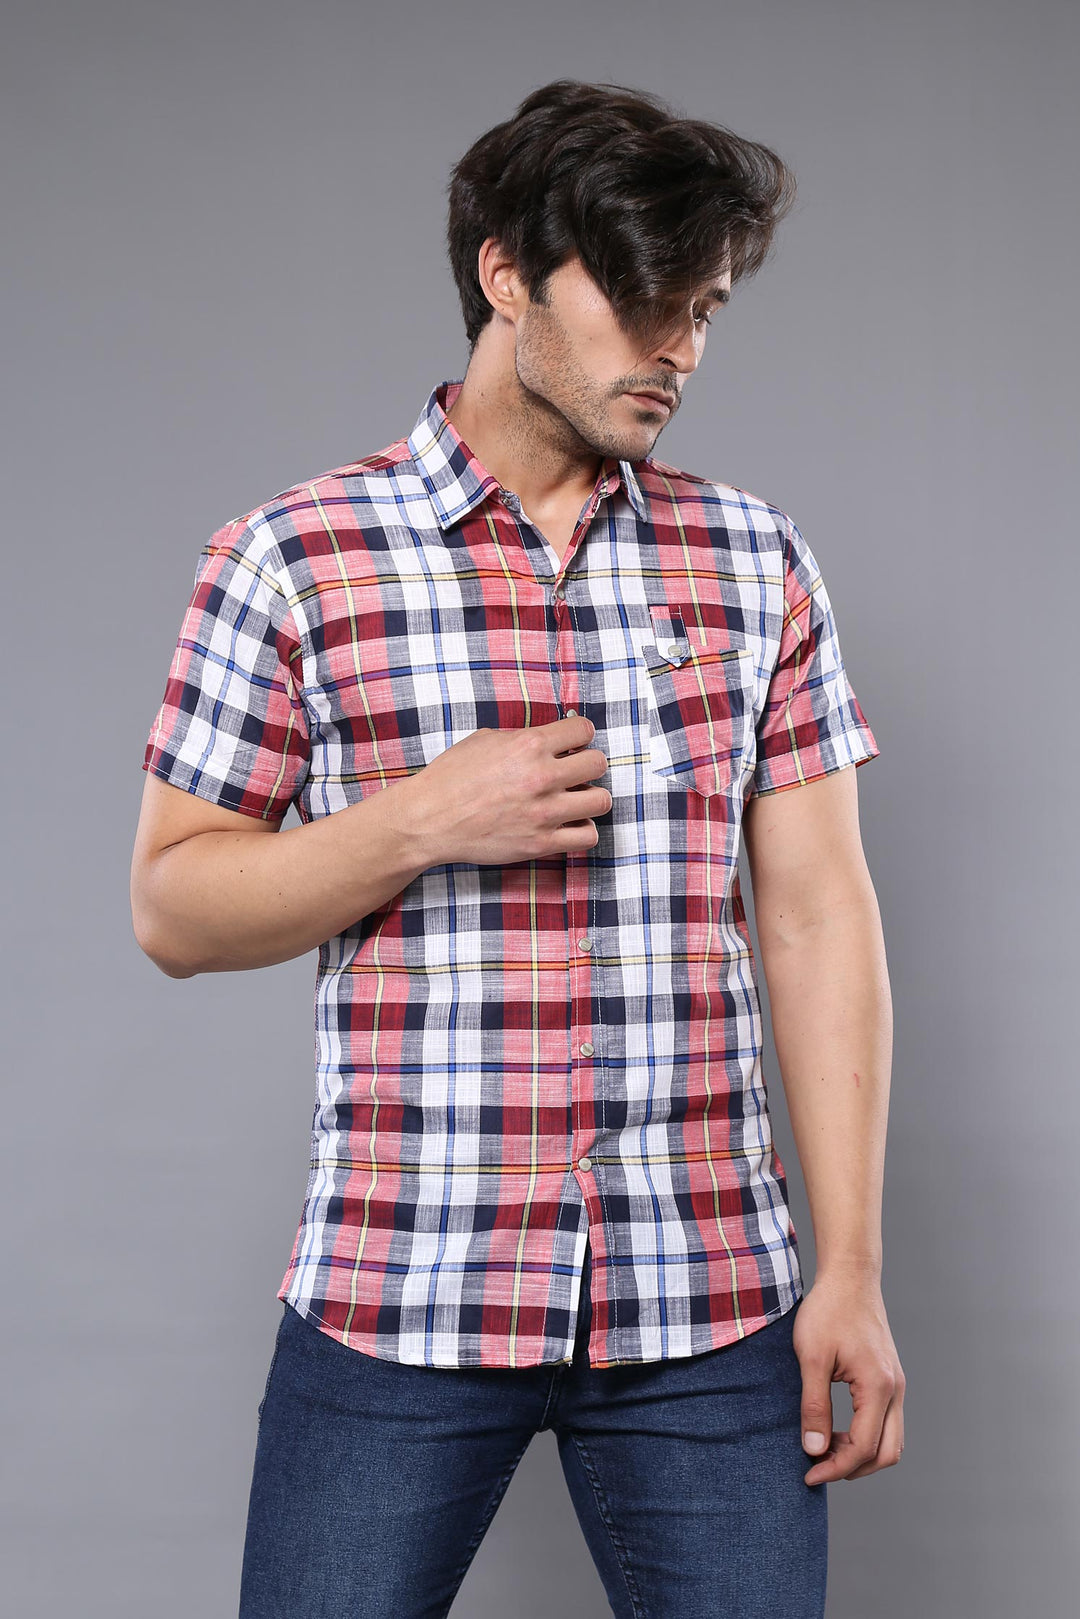 Checked Patterned Short Sleeve Men Shirt - Wessi